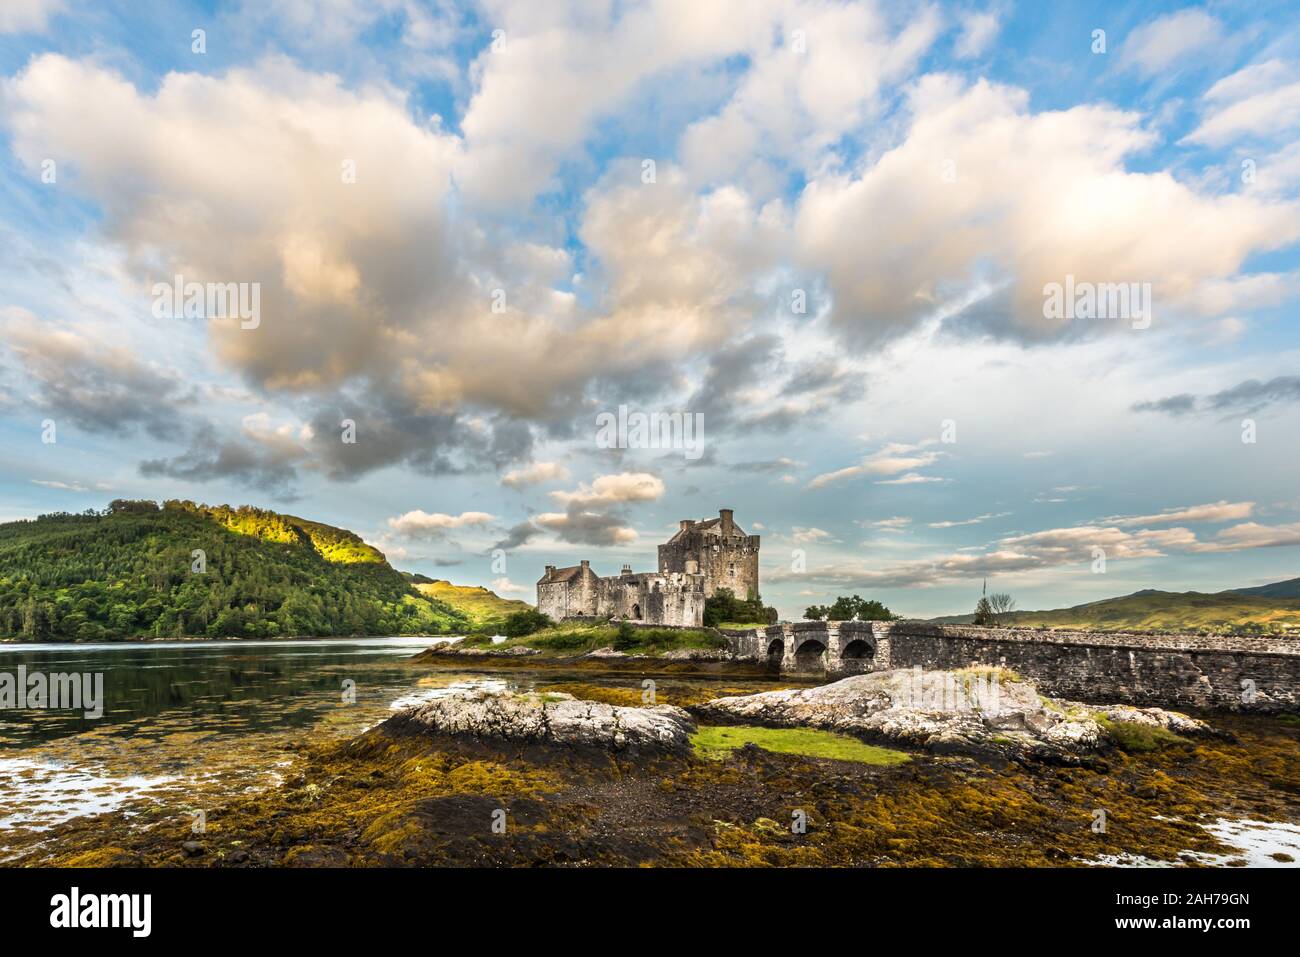 Ancient scottish castle sitting on a rock among seaweeds under a blue sky with puffy clouds in the early morning light Stock Photo